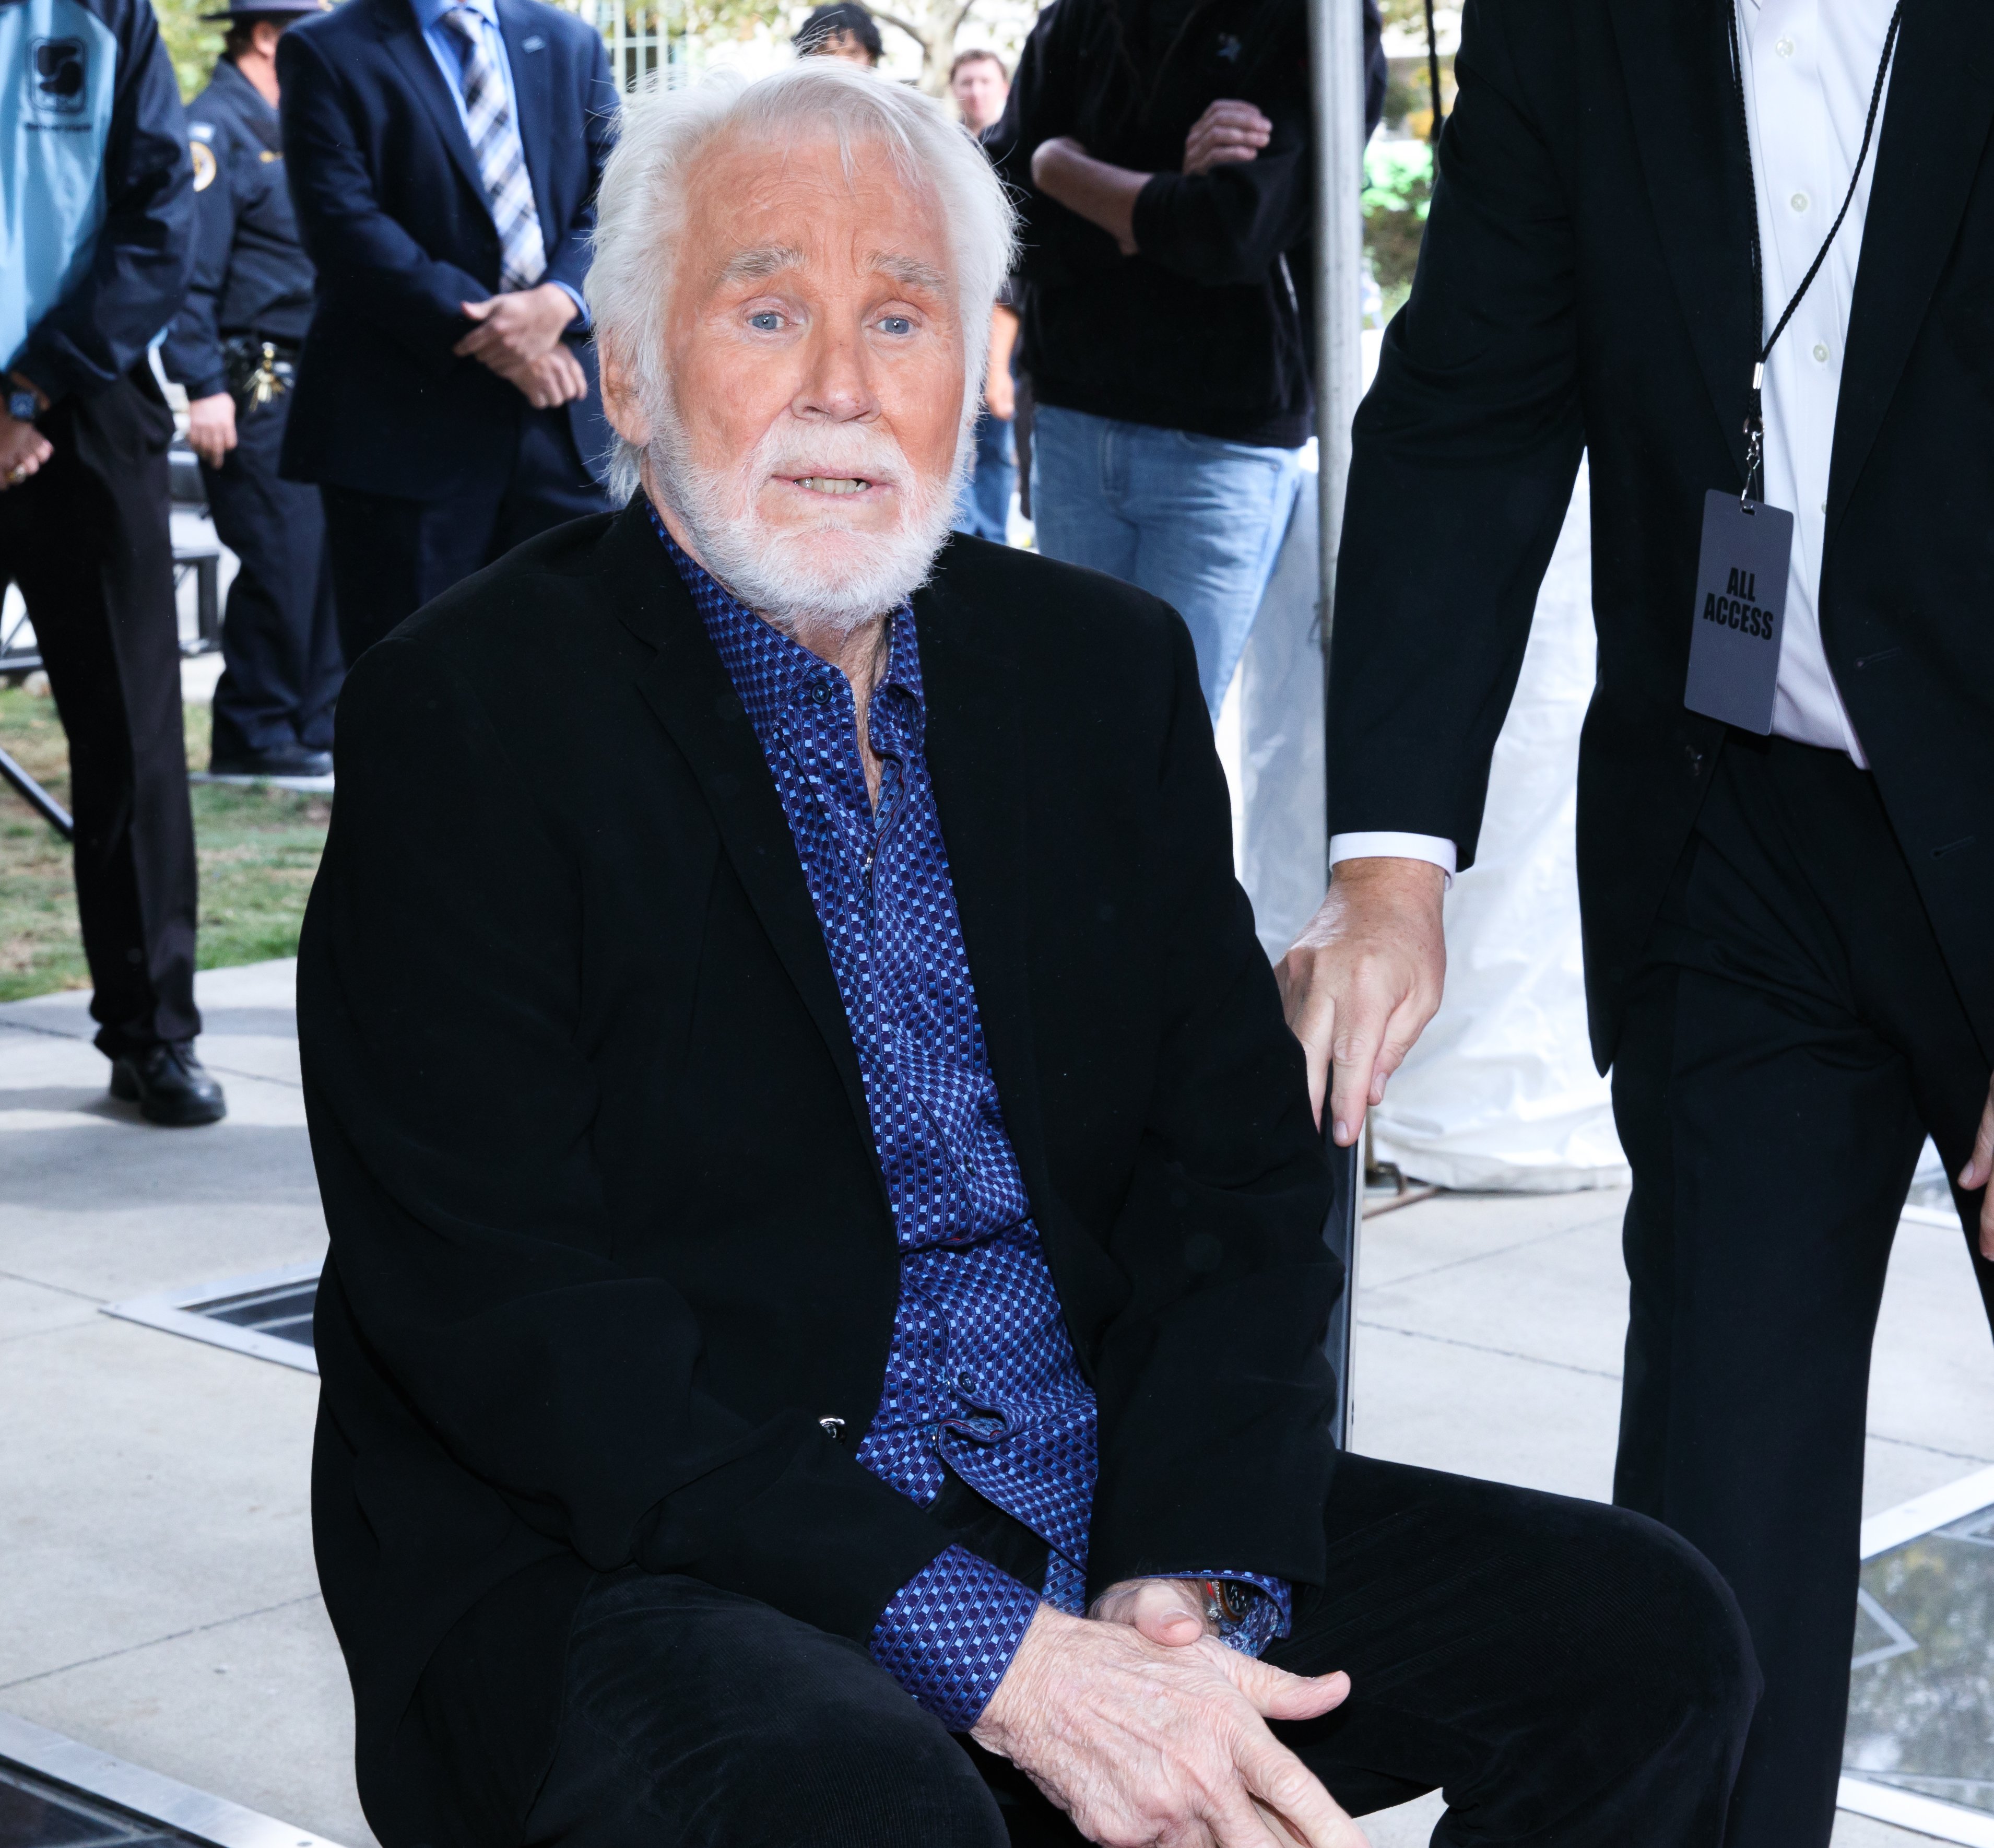 Kenny Rogers being inducted into the Nashville Music City Walk of Fame in 2017 in Nashville, Tennessee | Photo: Anna Webber/Getty Images